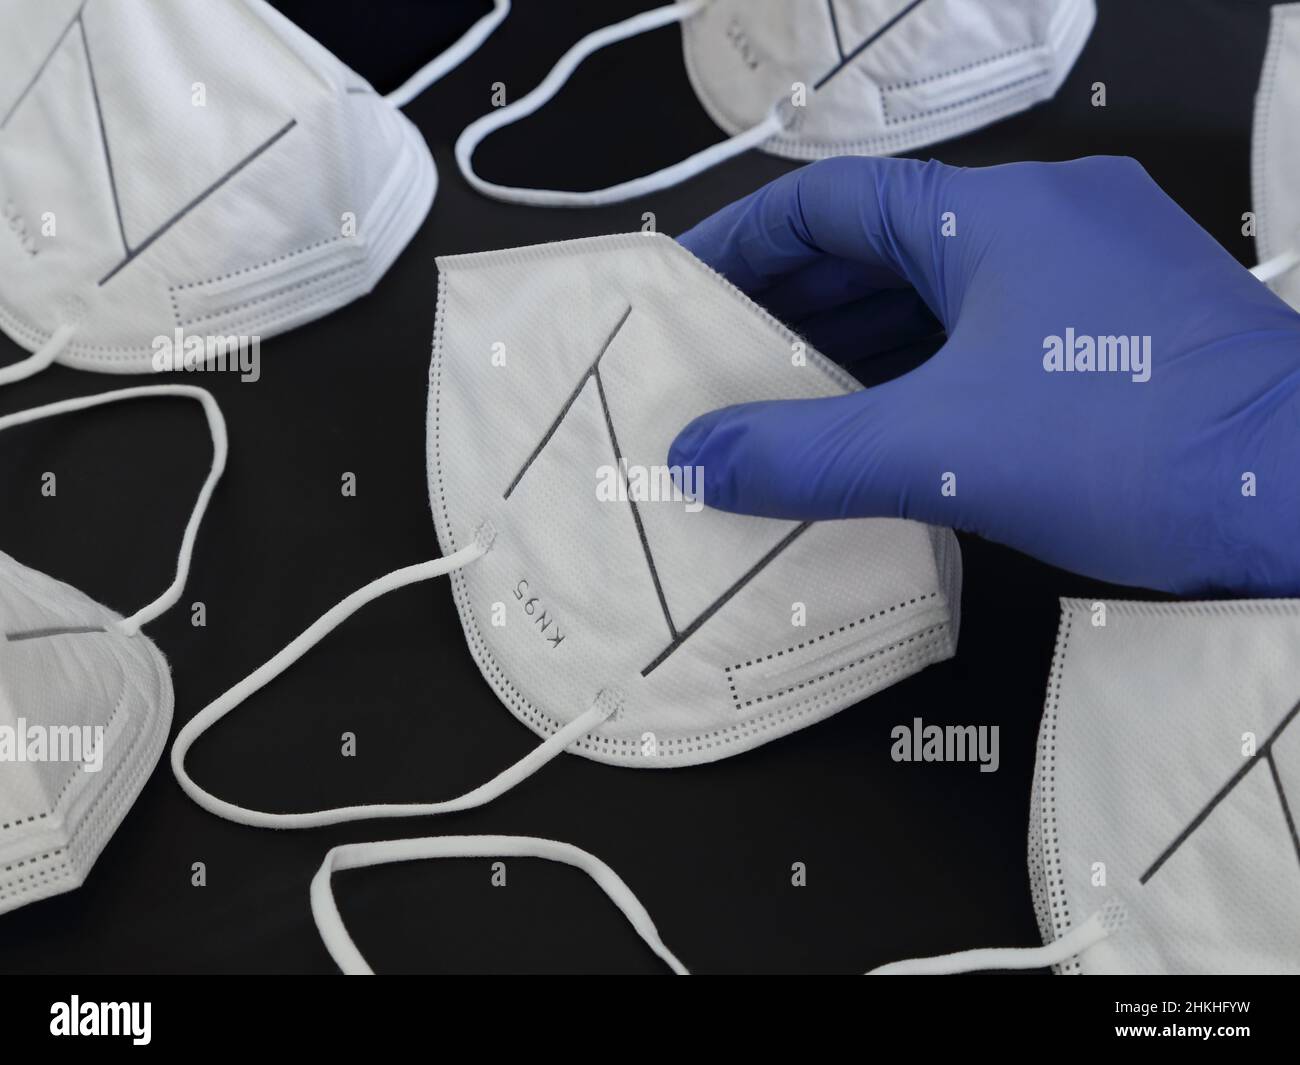 A hand wearing blue nitrile rubber gloves takes a mask from a stockpile of KN95 protective dust masks. Stock Photo